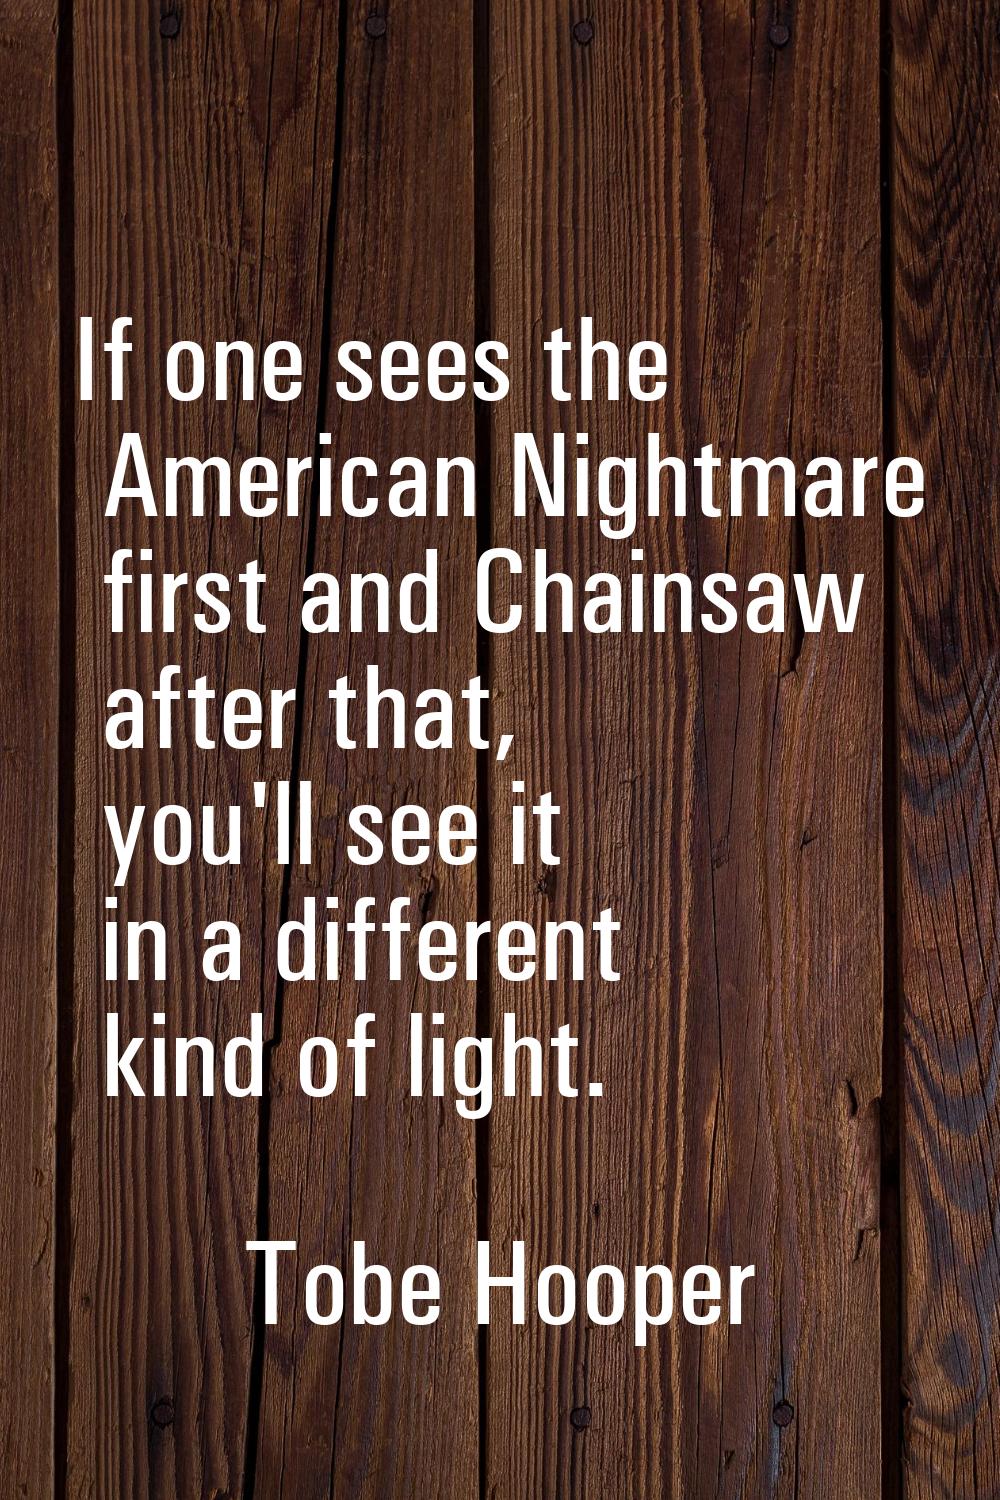 If one sees the American Nightmare first and Chainsaw after that, you'll see it in a different kind